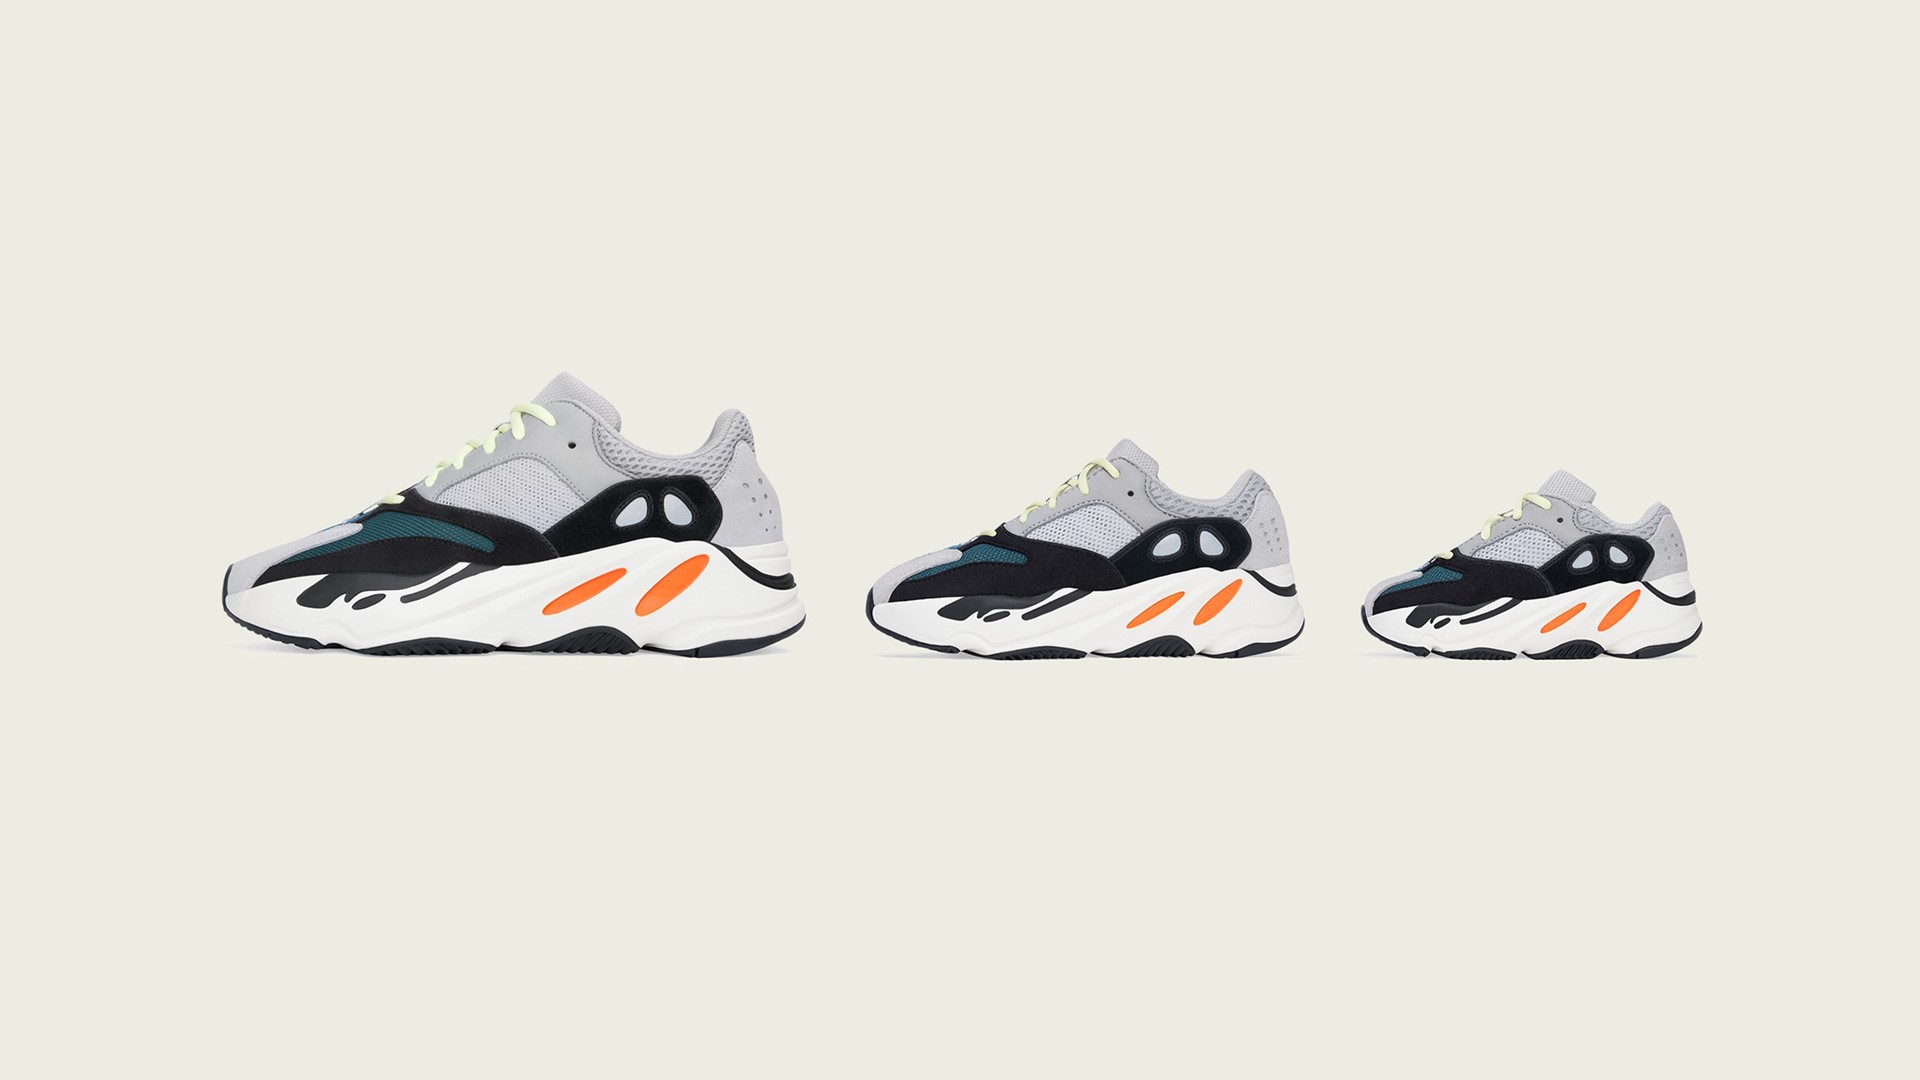 Kanye West release the Yeezy Boost 700 